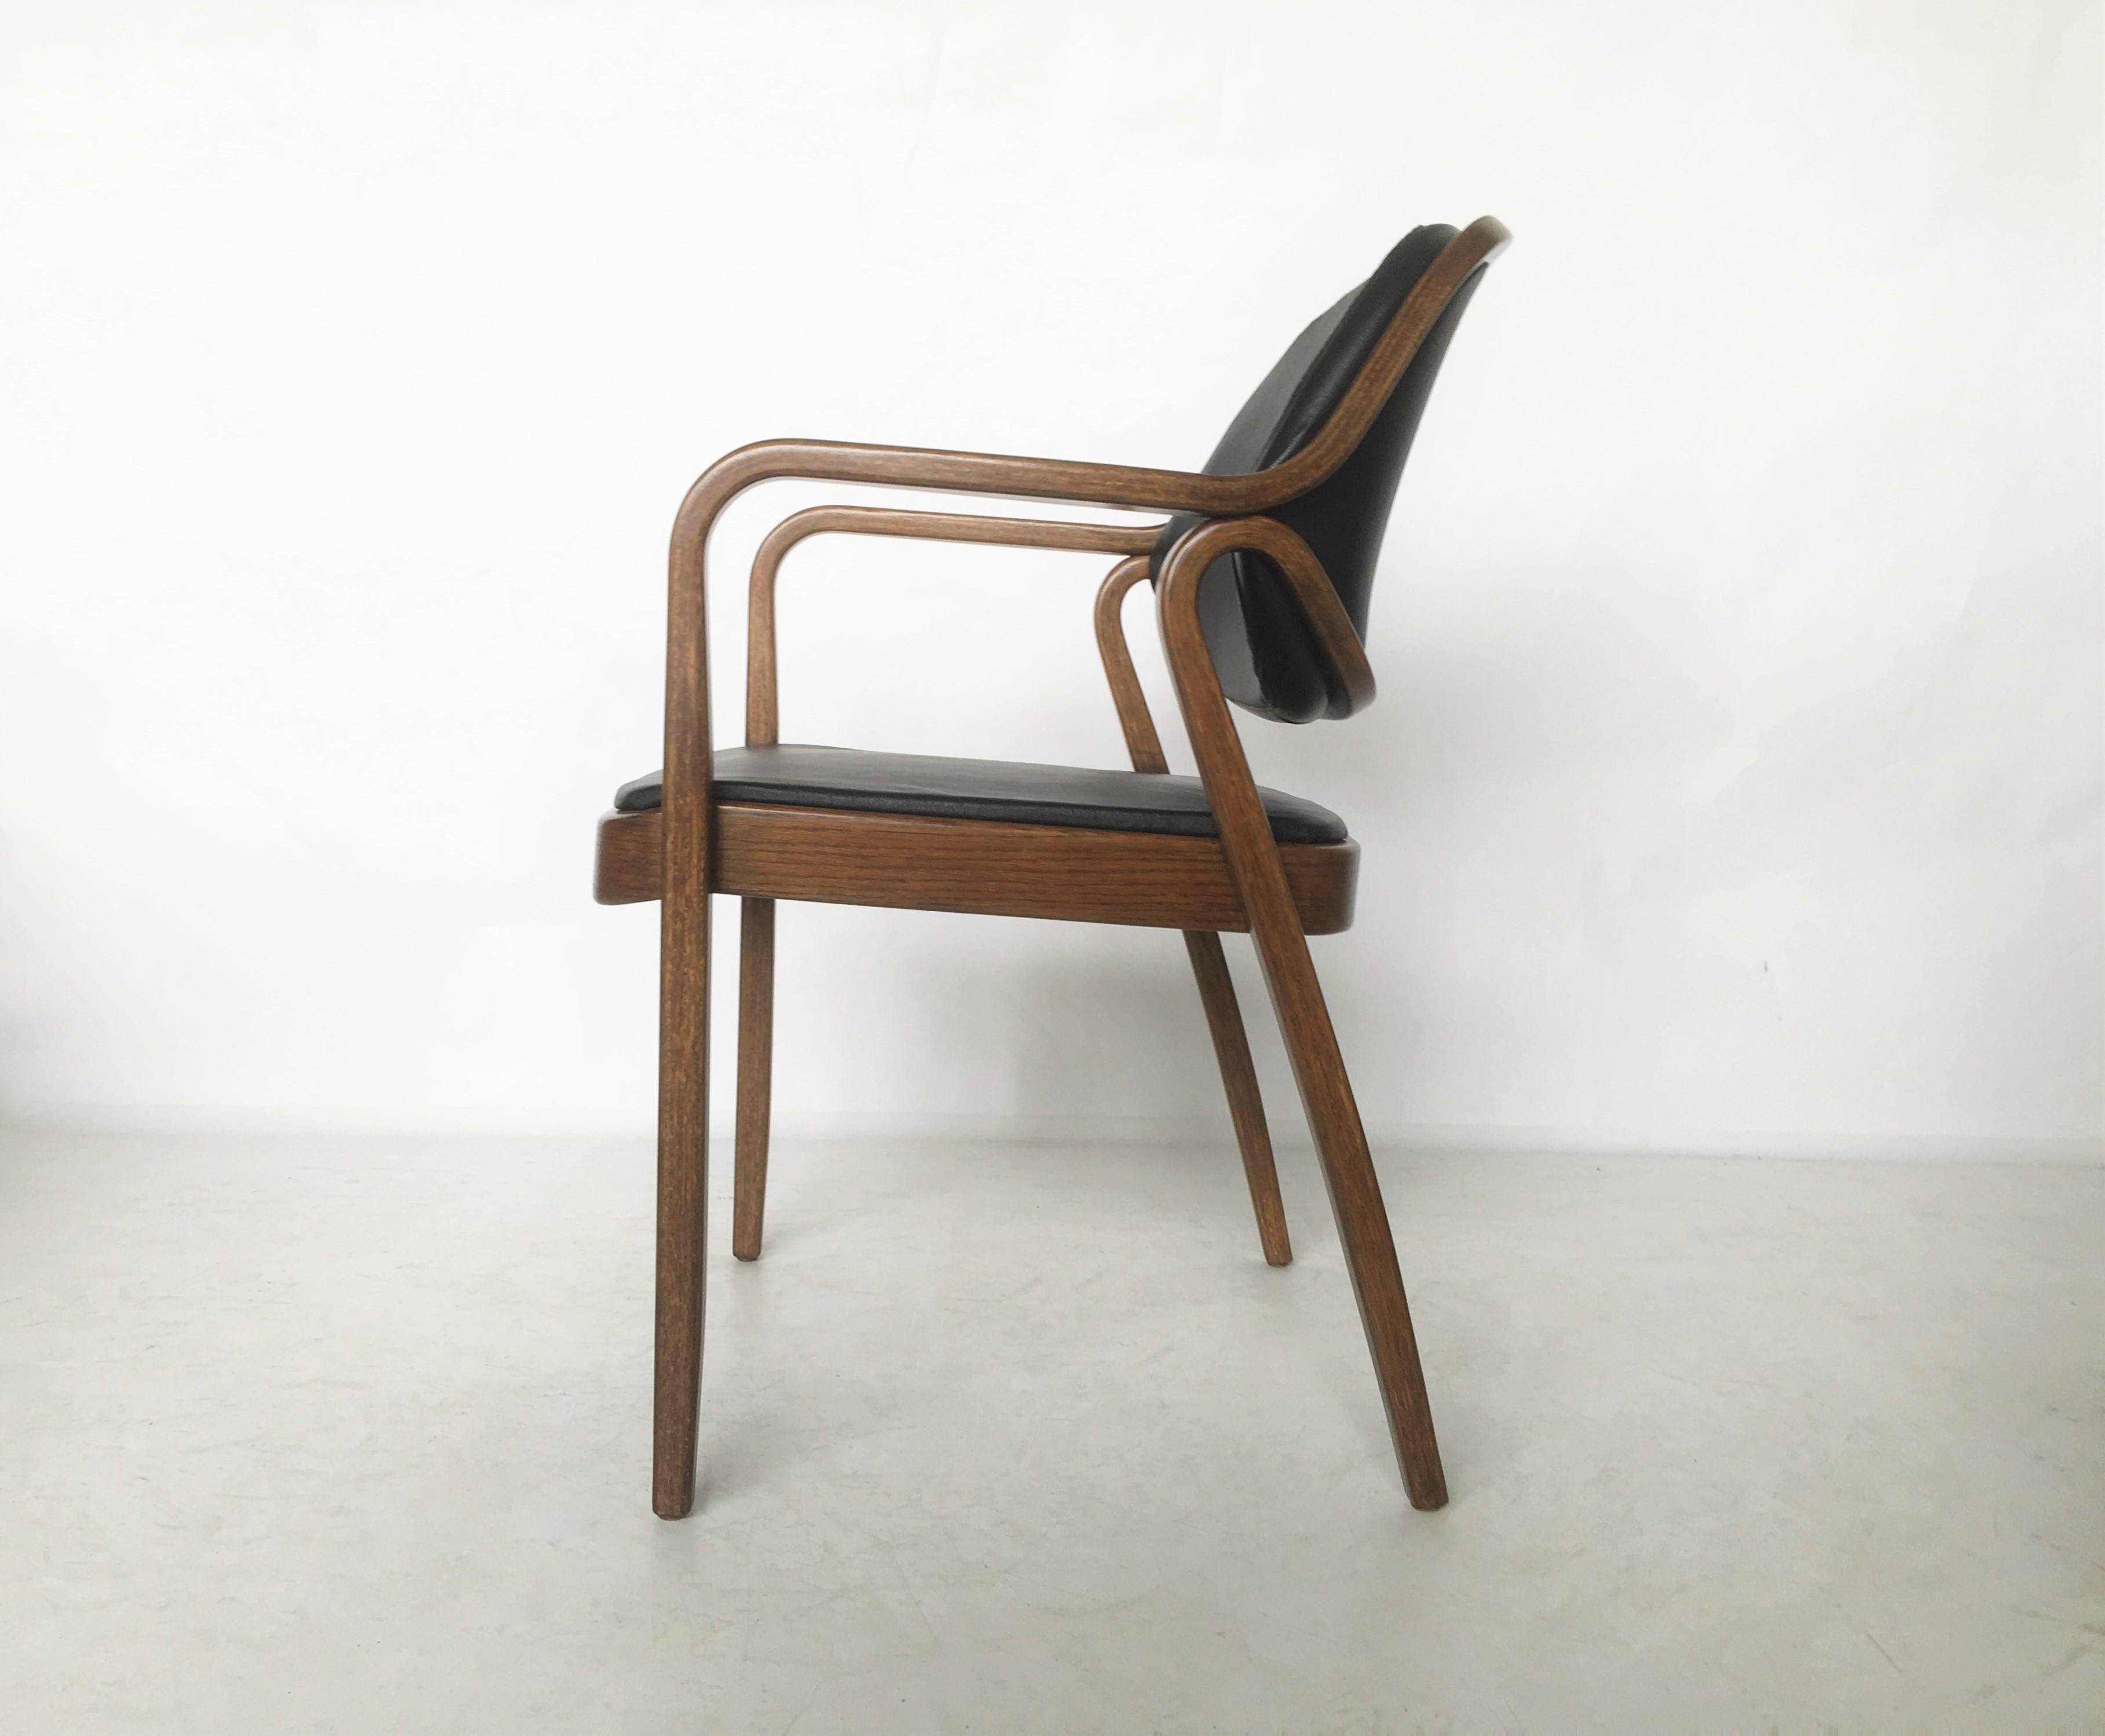 Six bentwood armchairs model #1105 by Don Petitt for Knoll. Two lengths of pressed and bent layers of sculpted wood make up the legs and arms as well as the seat back frames. Restored, the chairs feature black leather upholstery that compliments the